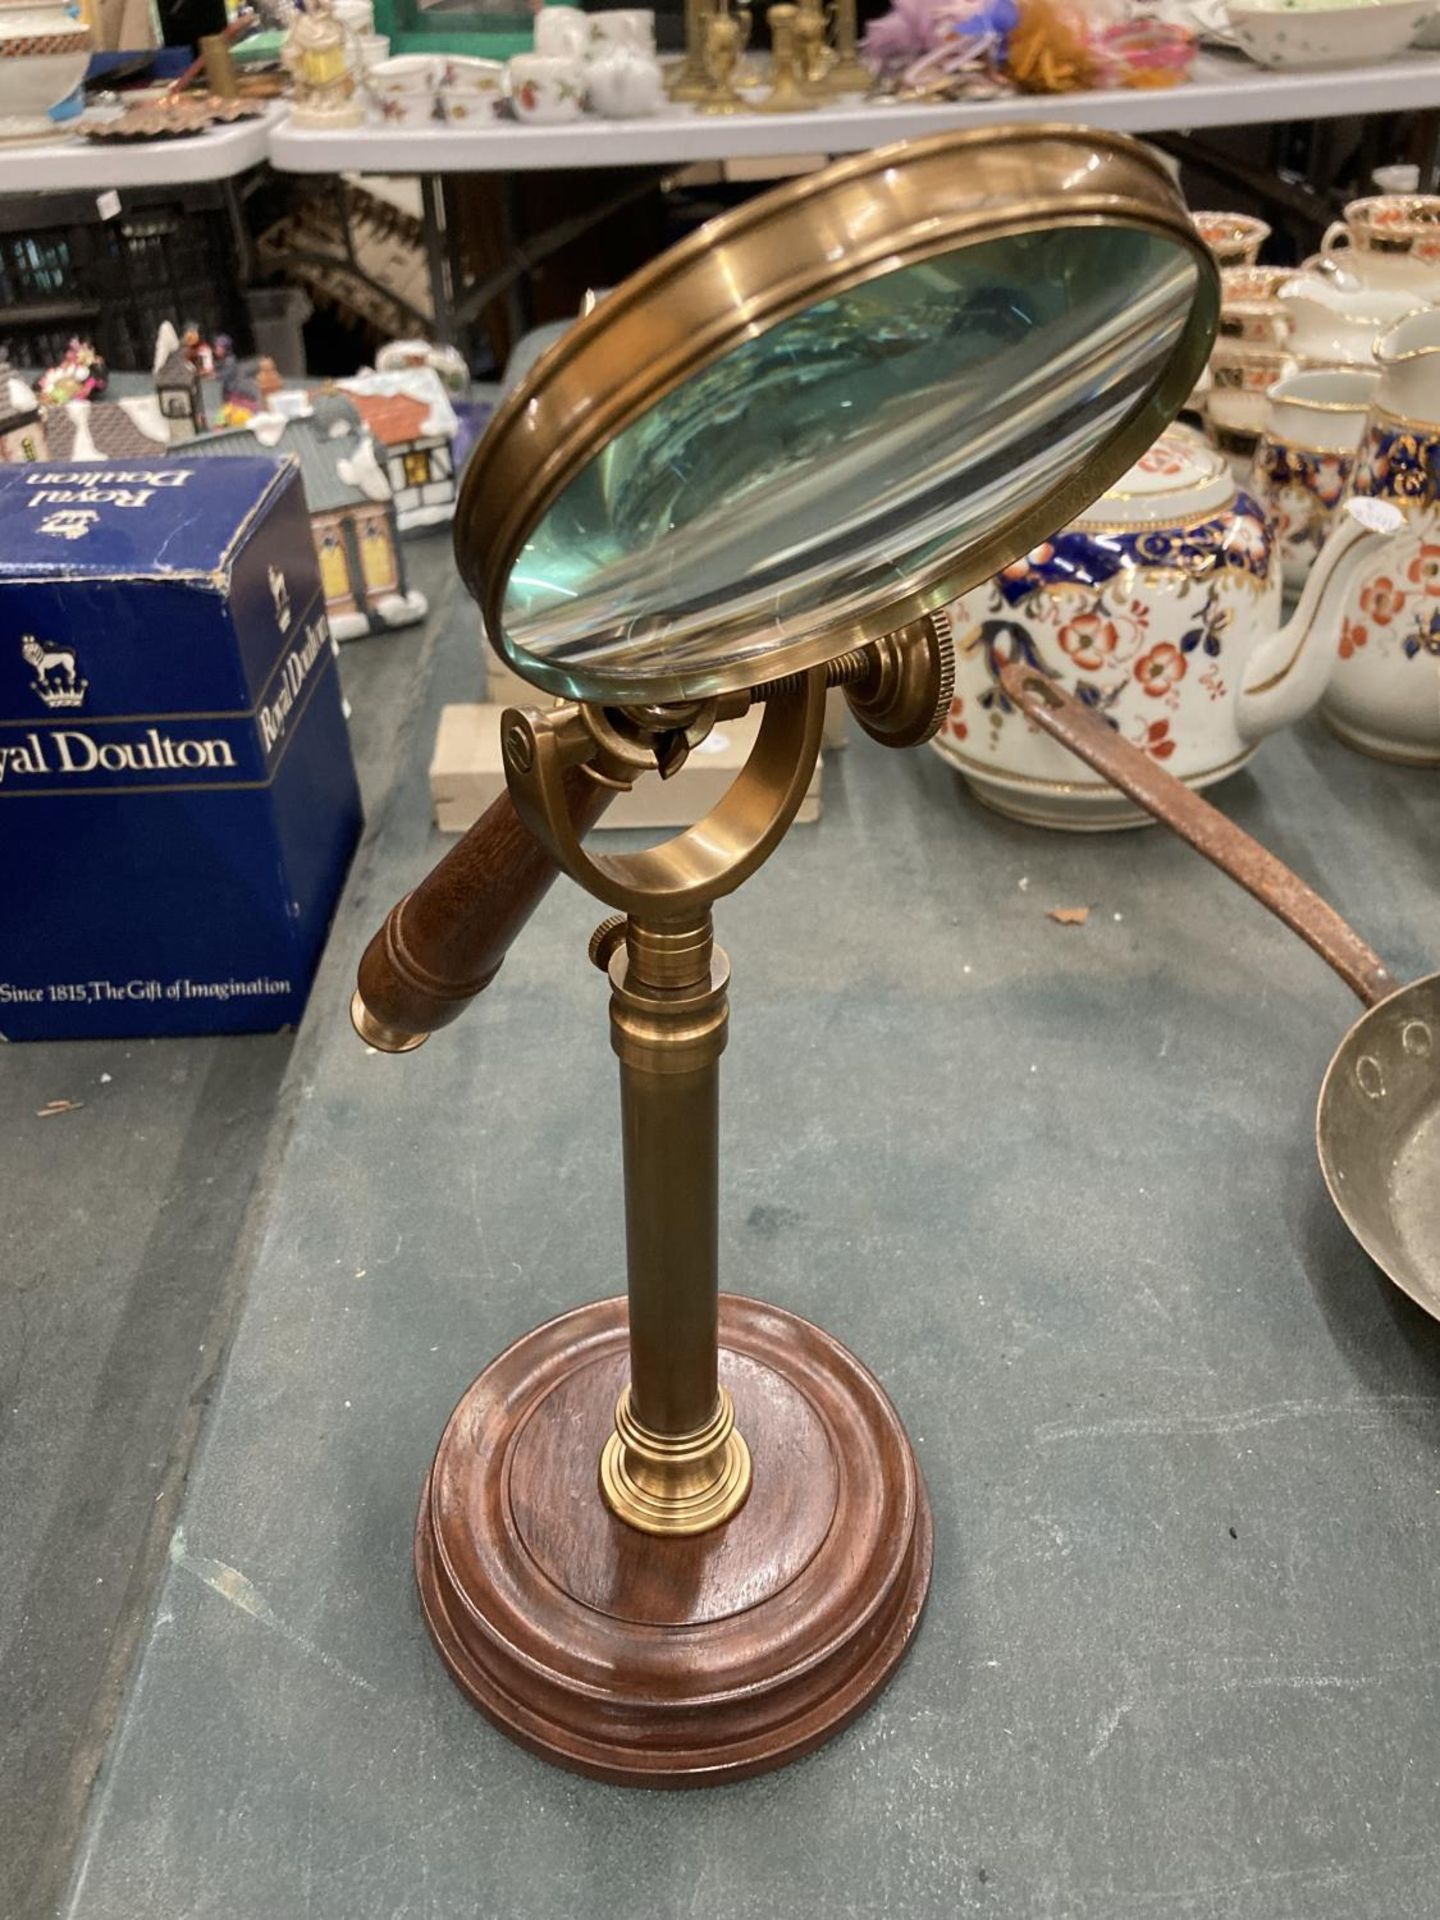 A BRASS MAGNIFYING GLASS ON A GLASS STAND AND WOODEN BASE - Image 3 of 3